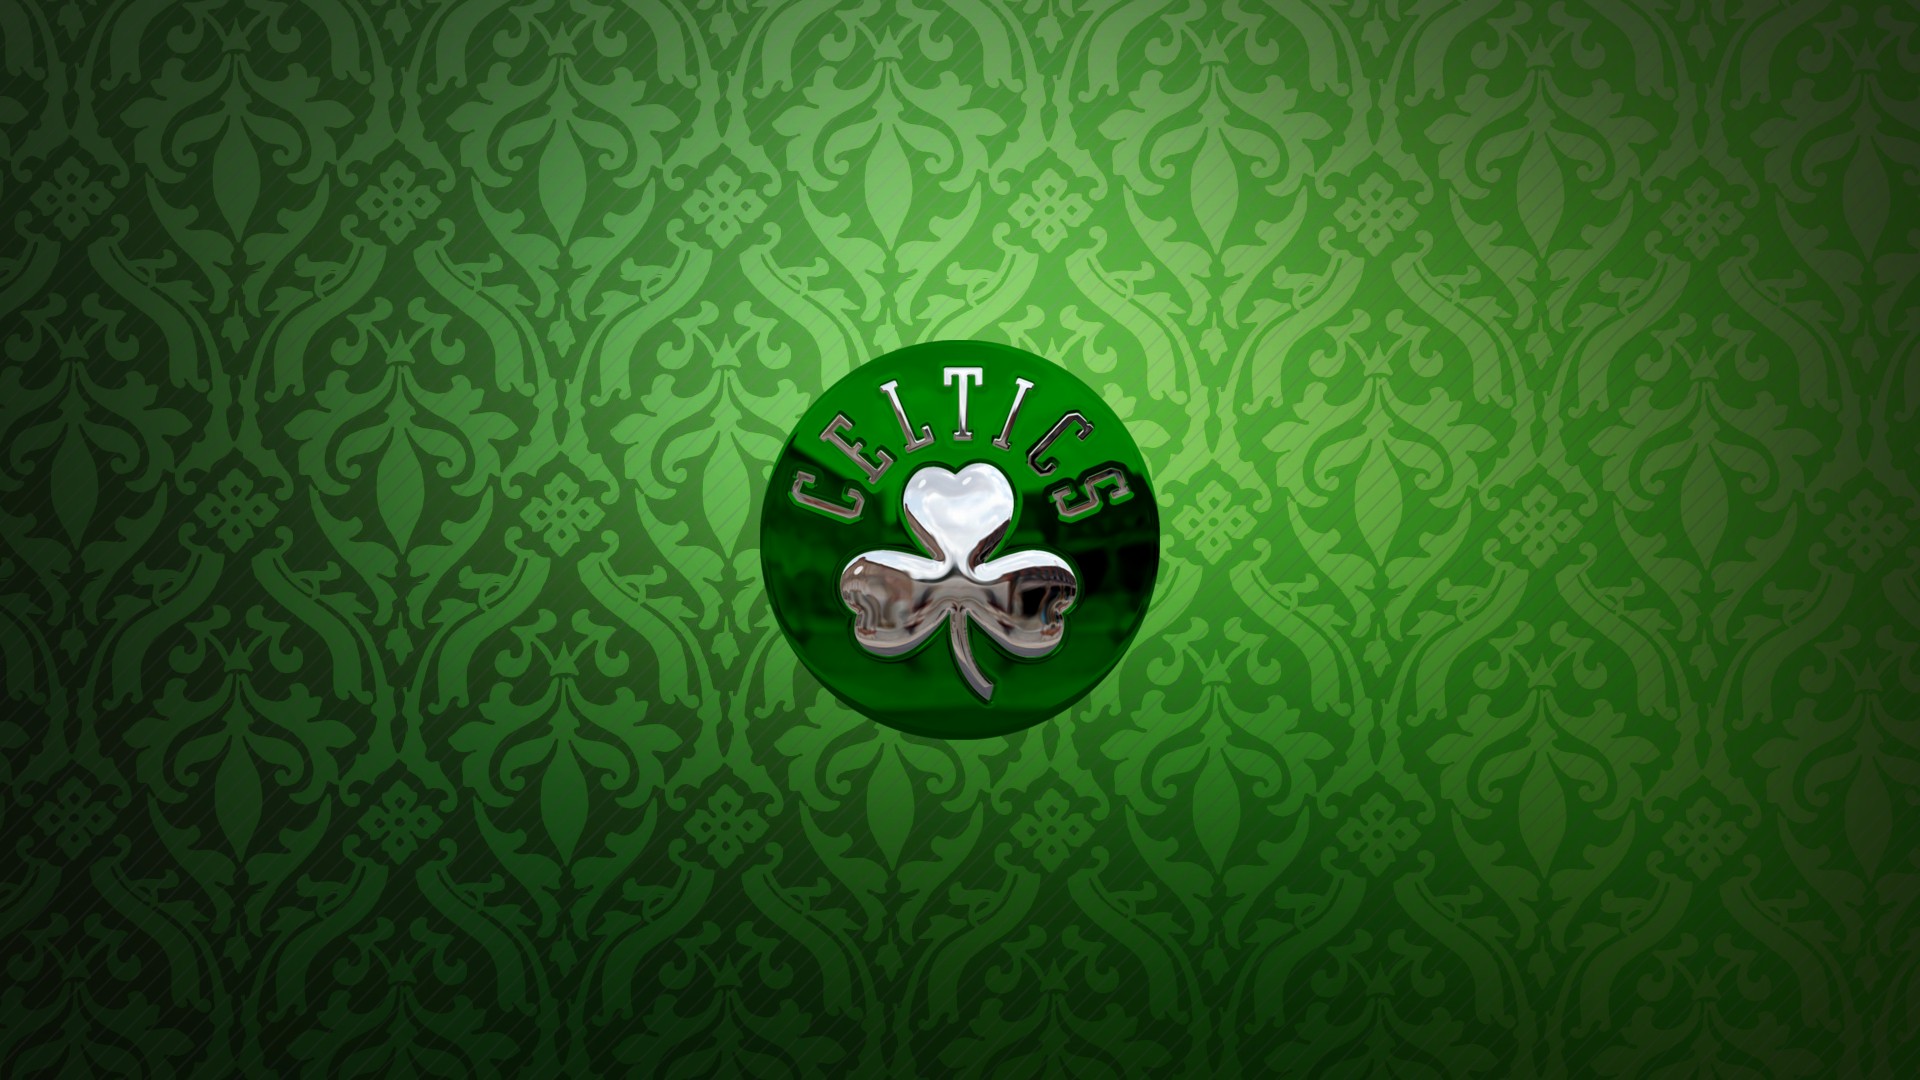 Celtics Wallpaper For Mac Backgrounds with high-resolution 1920x1080 pixel. You can use this wallpaper for your Desktop Computer Backgrounds, Windows or Mac Screensavers, iPhone Lock screen, Tablet or Android and another Mobile Phone device